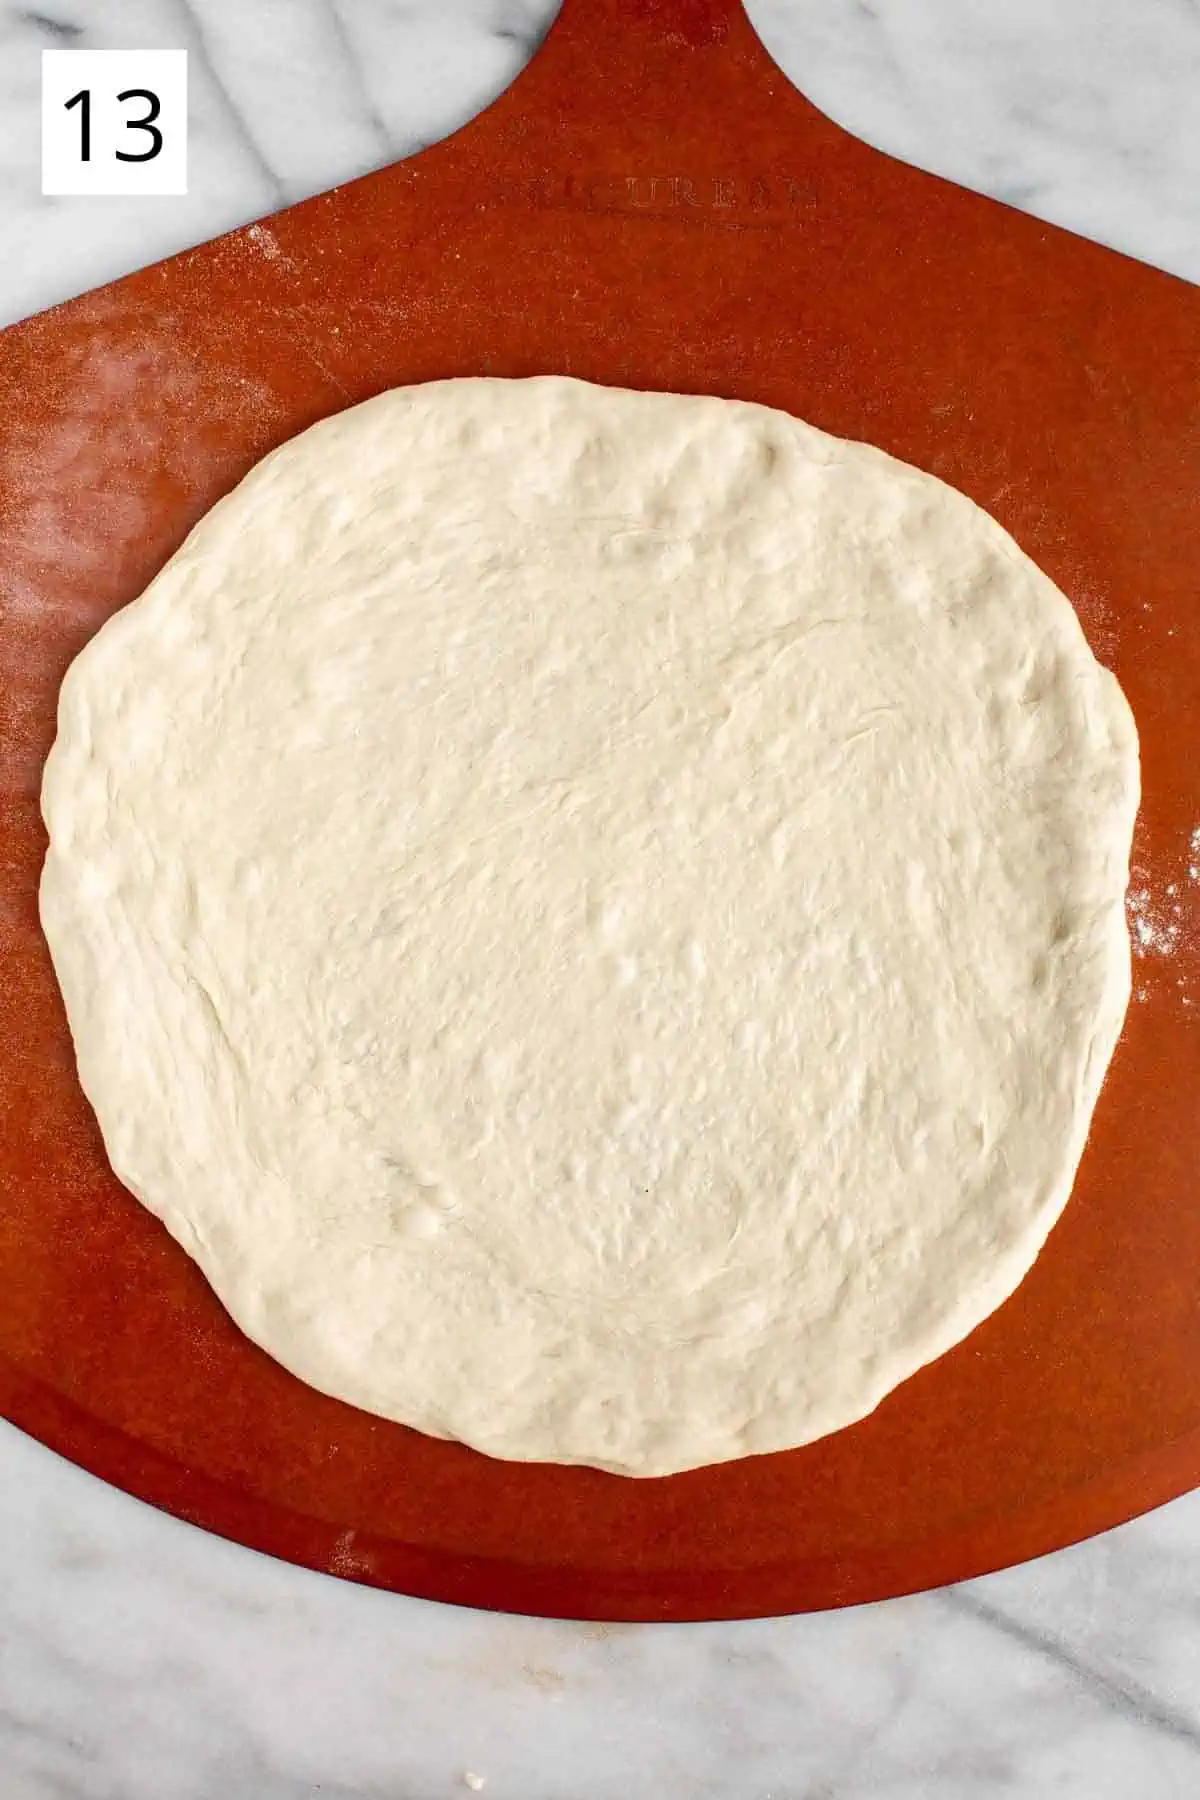 Rolled out pizza dough ready for toppings.